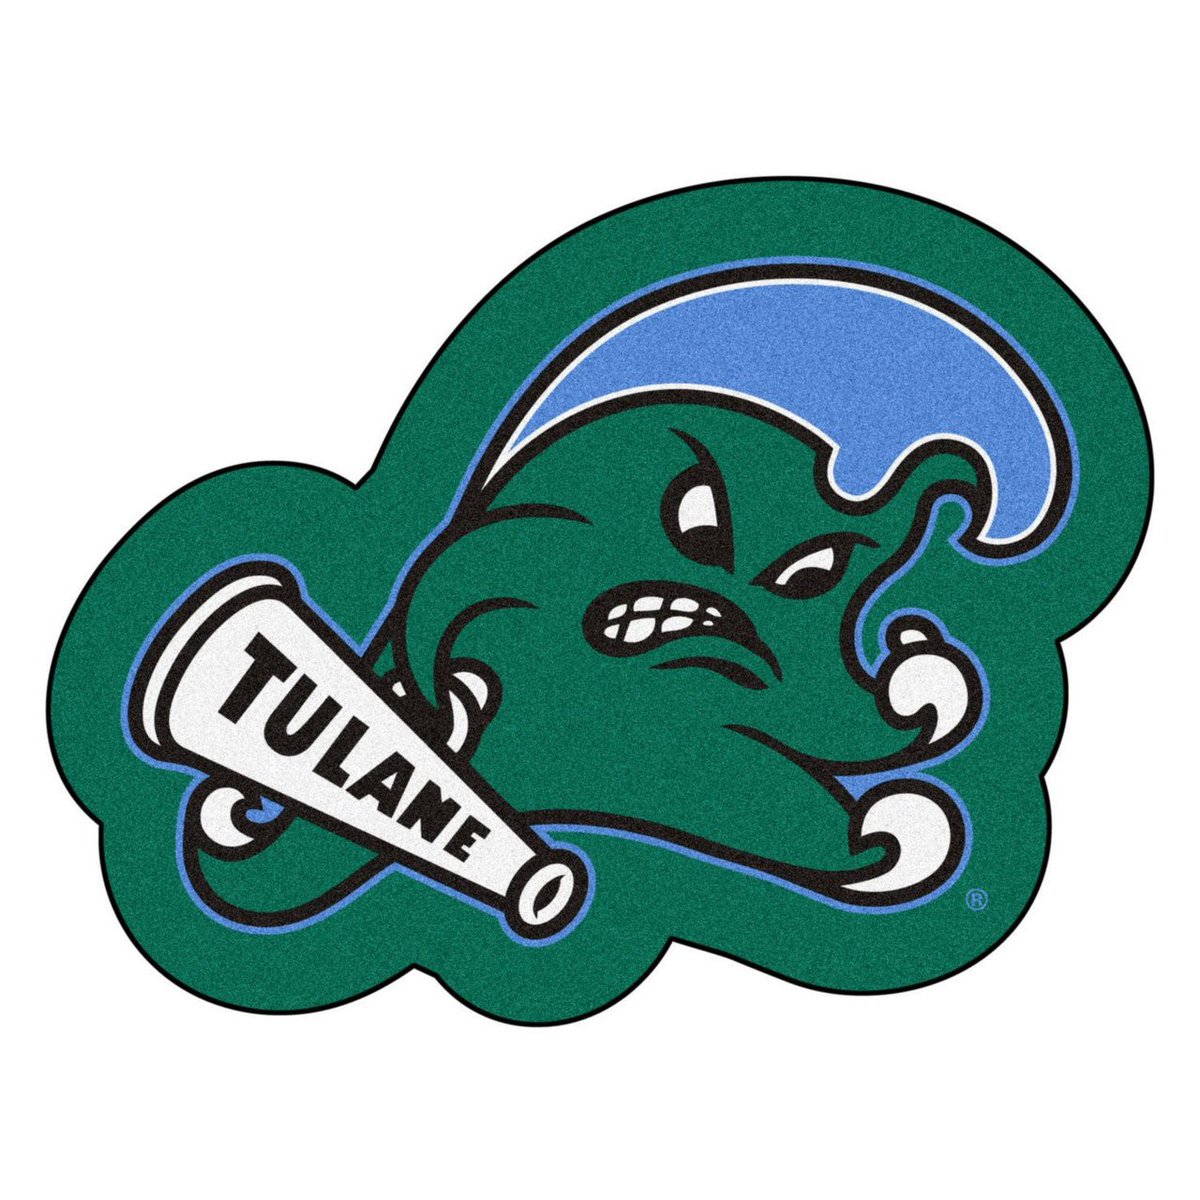 Beyond grateful for my 12th offer from Tulane University‼️🟢🔵🌊 @CoachGasparato @GreenWaveFB @GaitherFootbal1 @adamgorney @247Sports @BigCountyPreps1 @On3Recruits @Rivals #greenwave